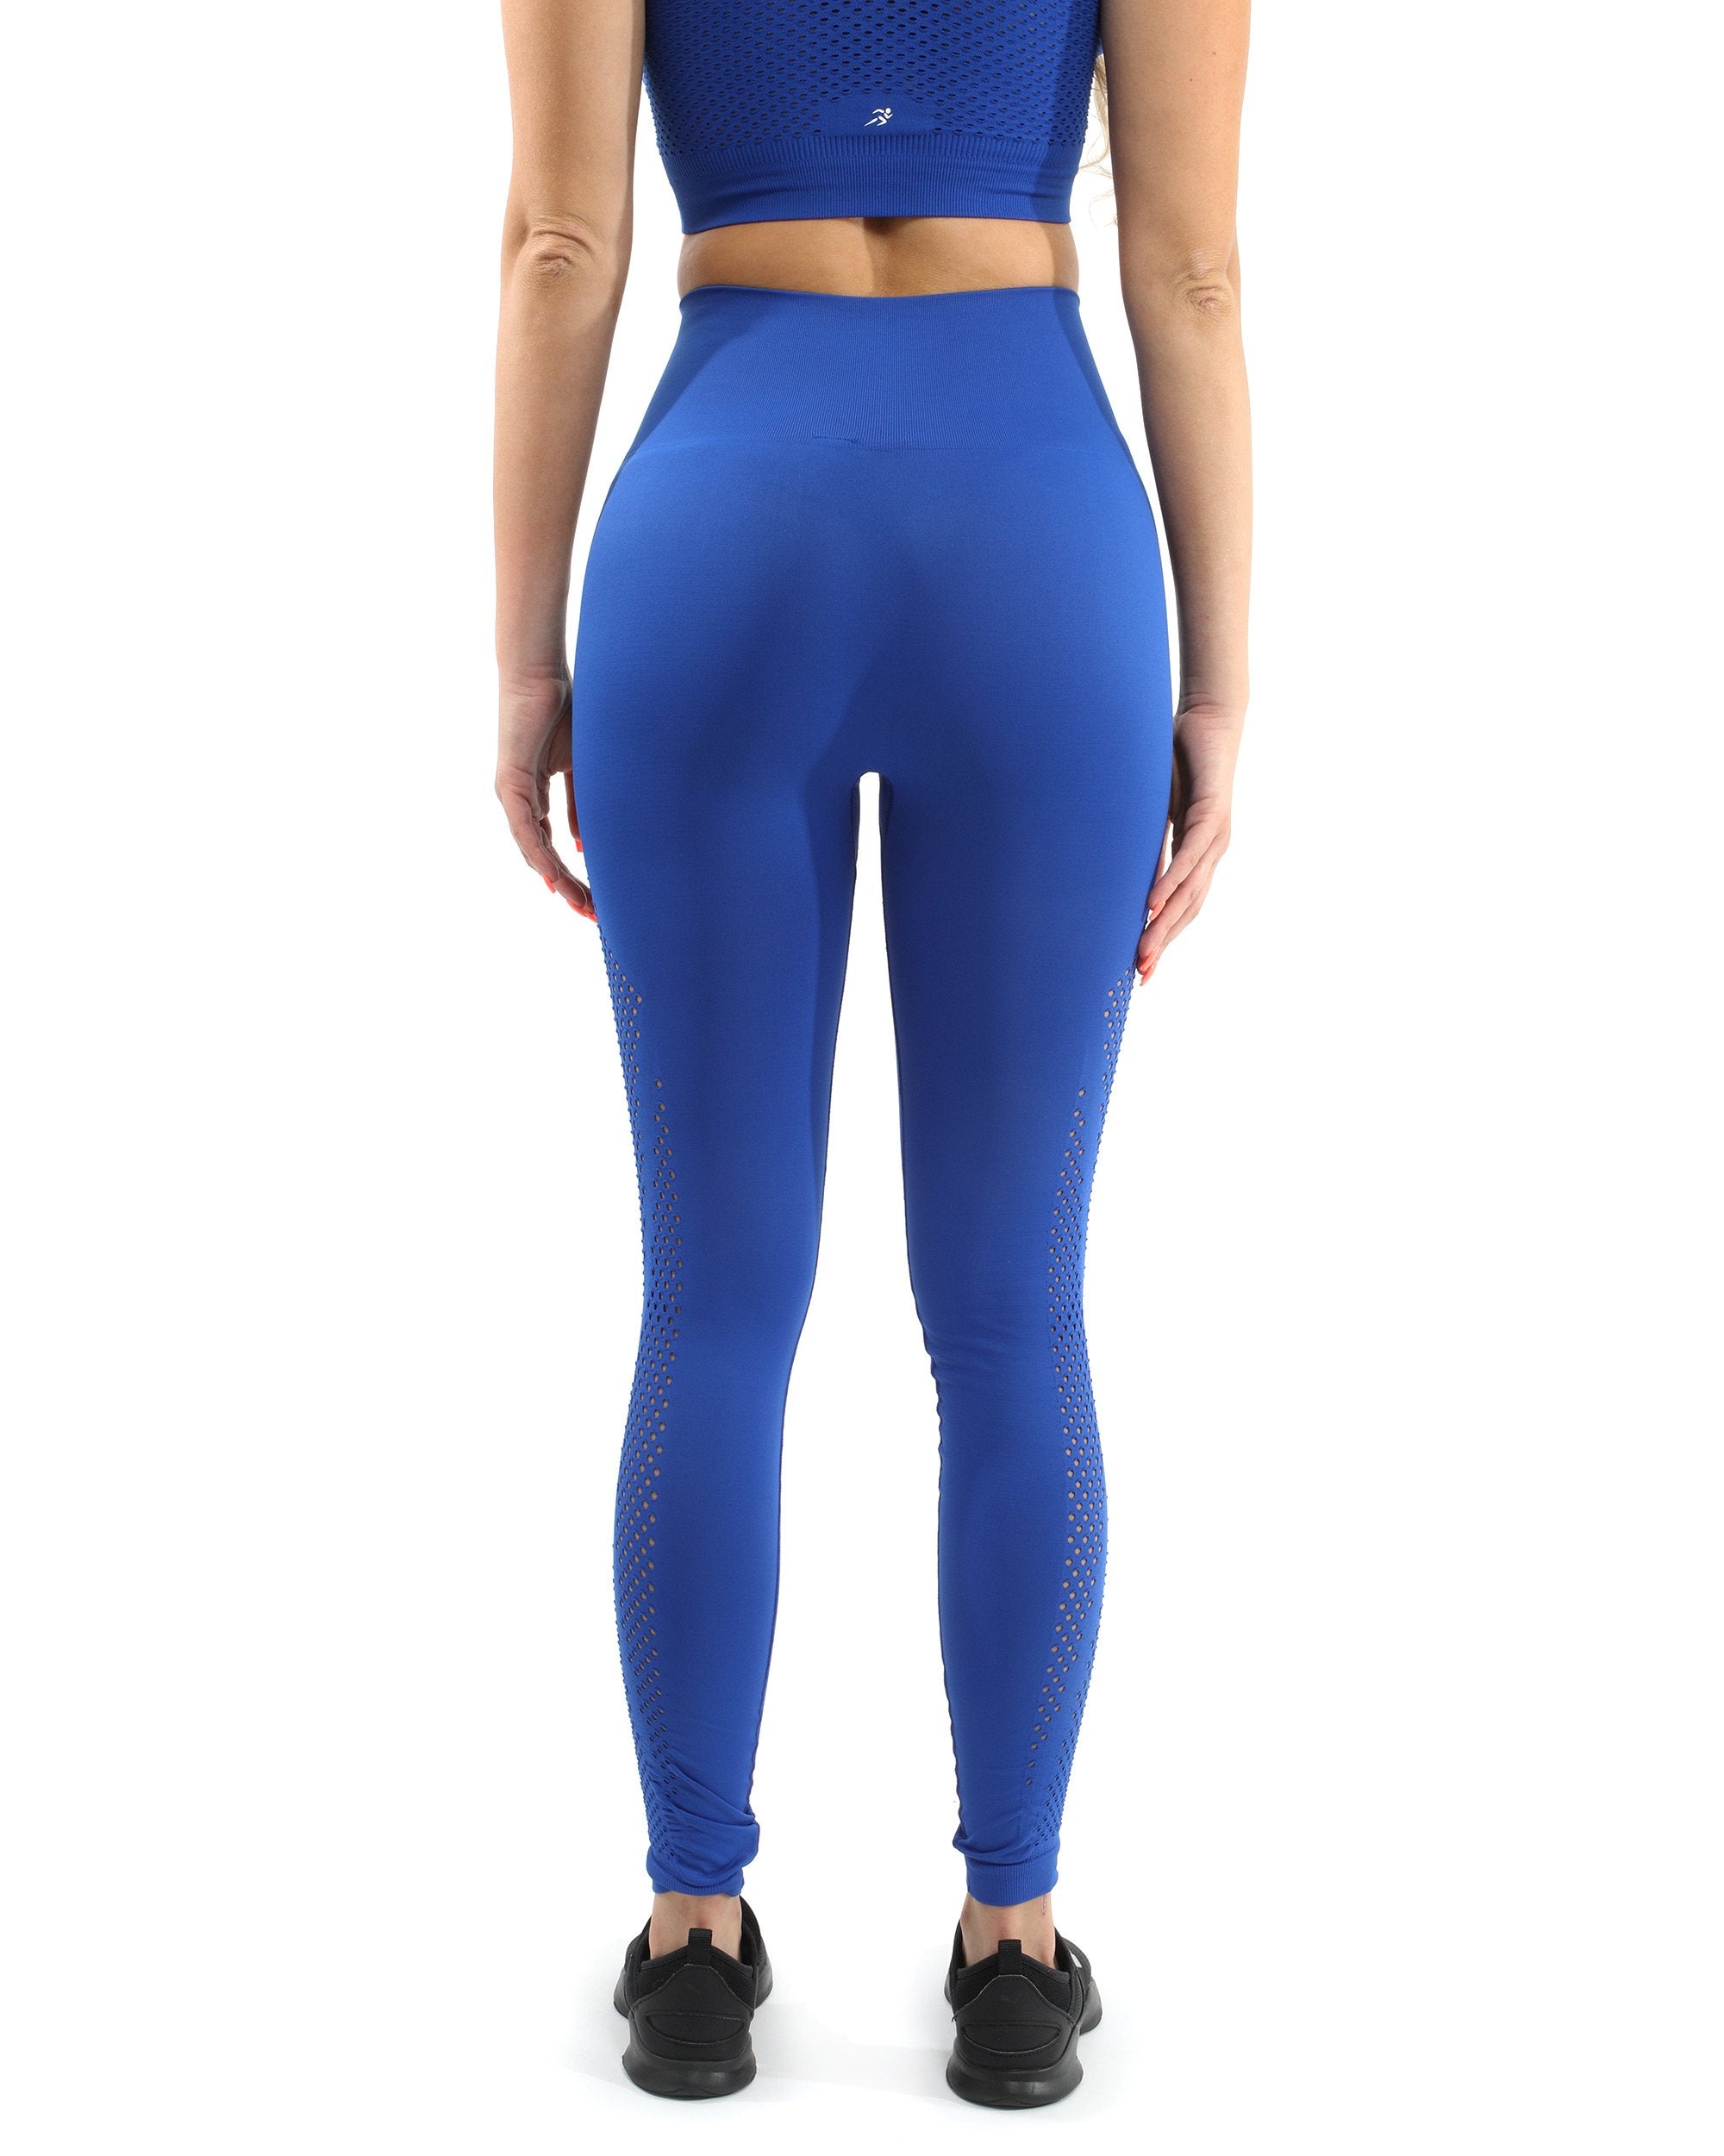 SALE! 50% OFF! Milano Seamless Set - Leggings & Sports Bra - Blue [MADE IN ITALY] - Size Small